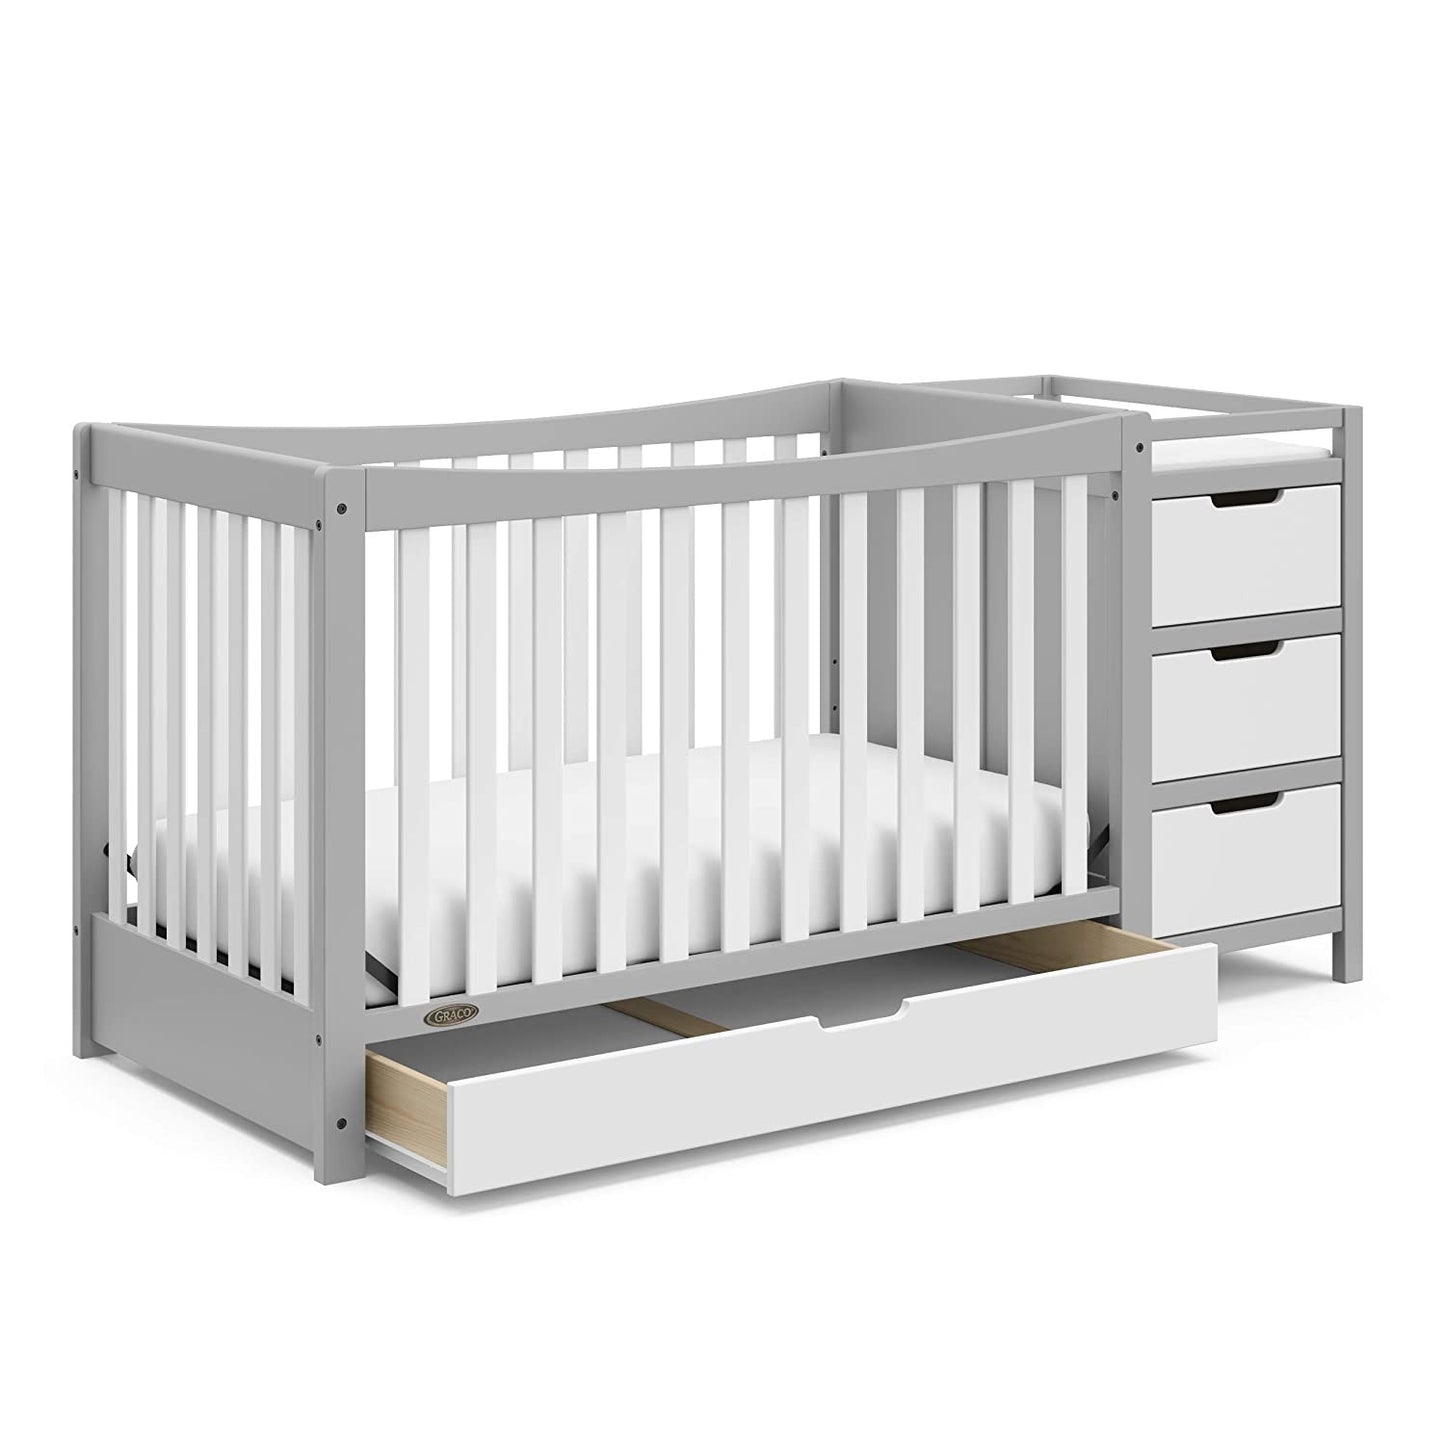 Graco Remi 4-in-1 Convertible Crib and Changer (Pebble Gray)